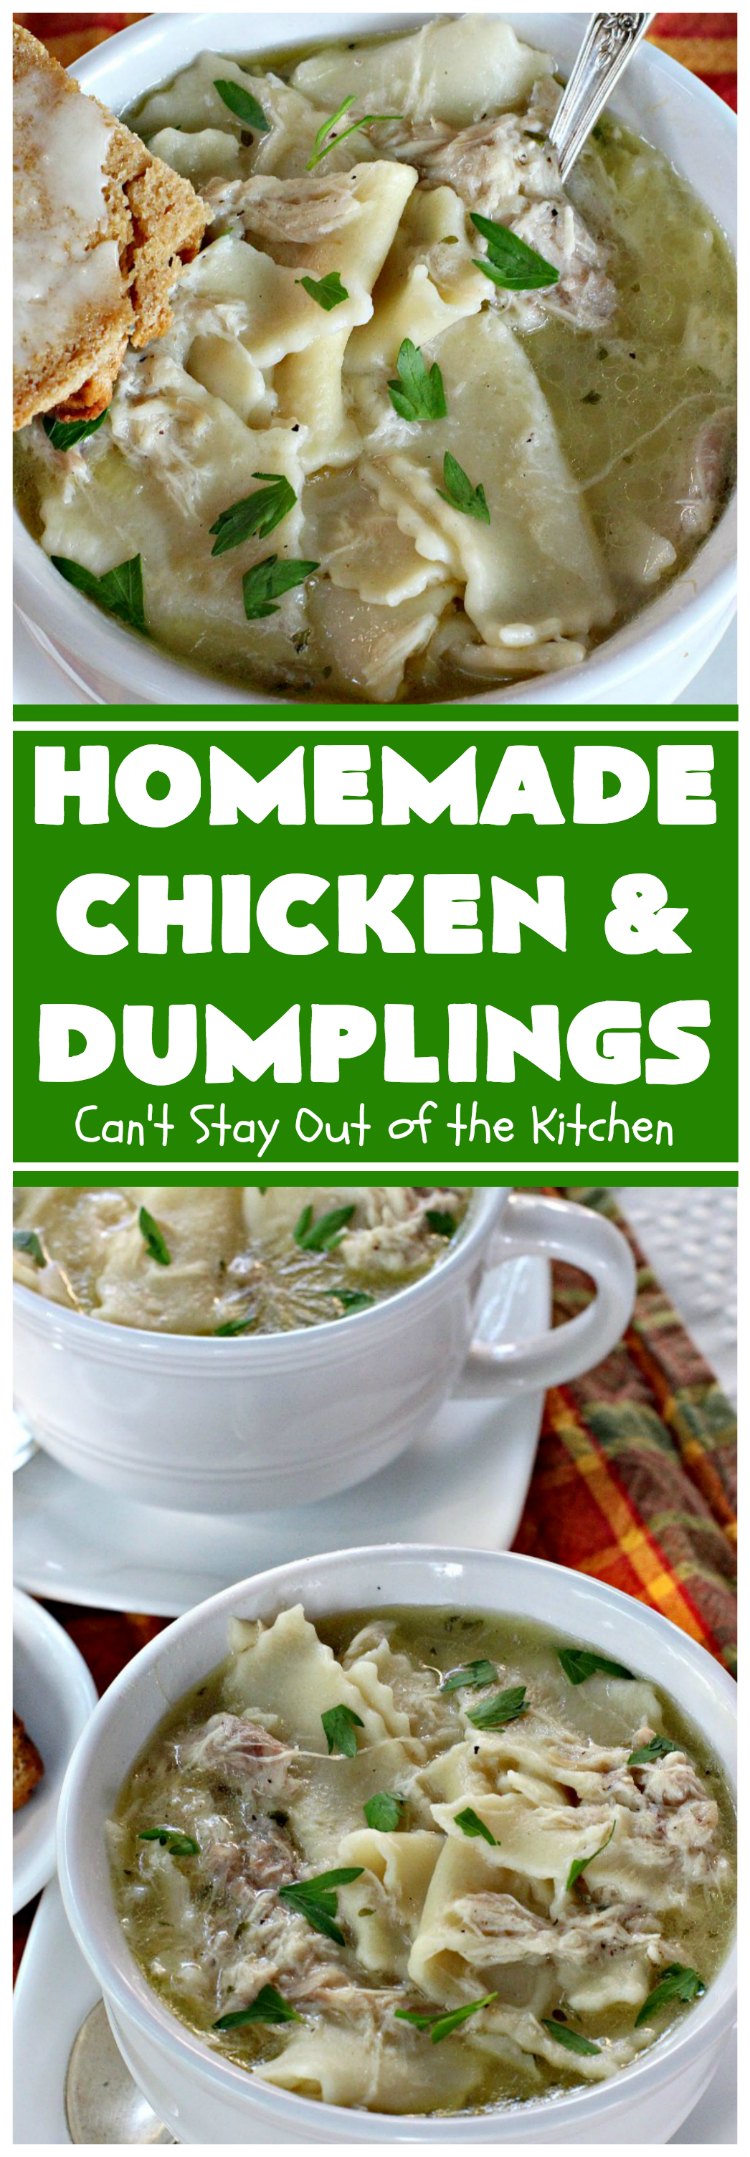 Homemade Chicken and Dumplings | Can't Stay Out of the Kitchen